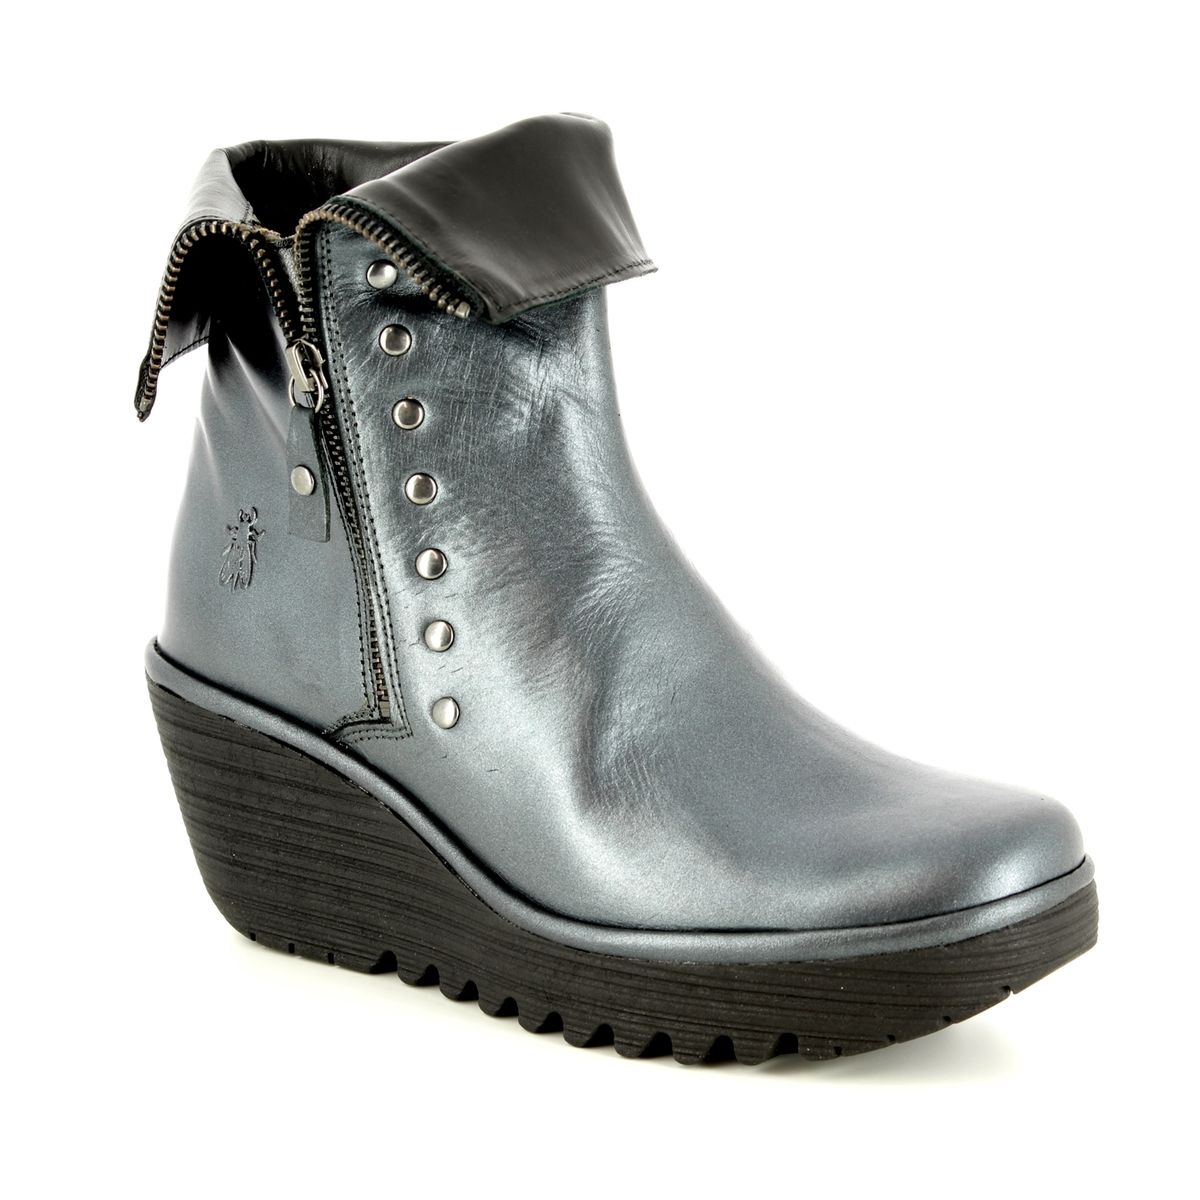 Buy > london fly ankle boots > in stock